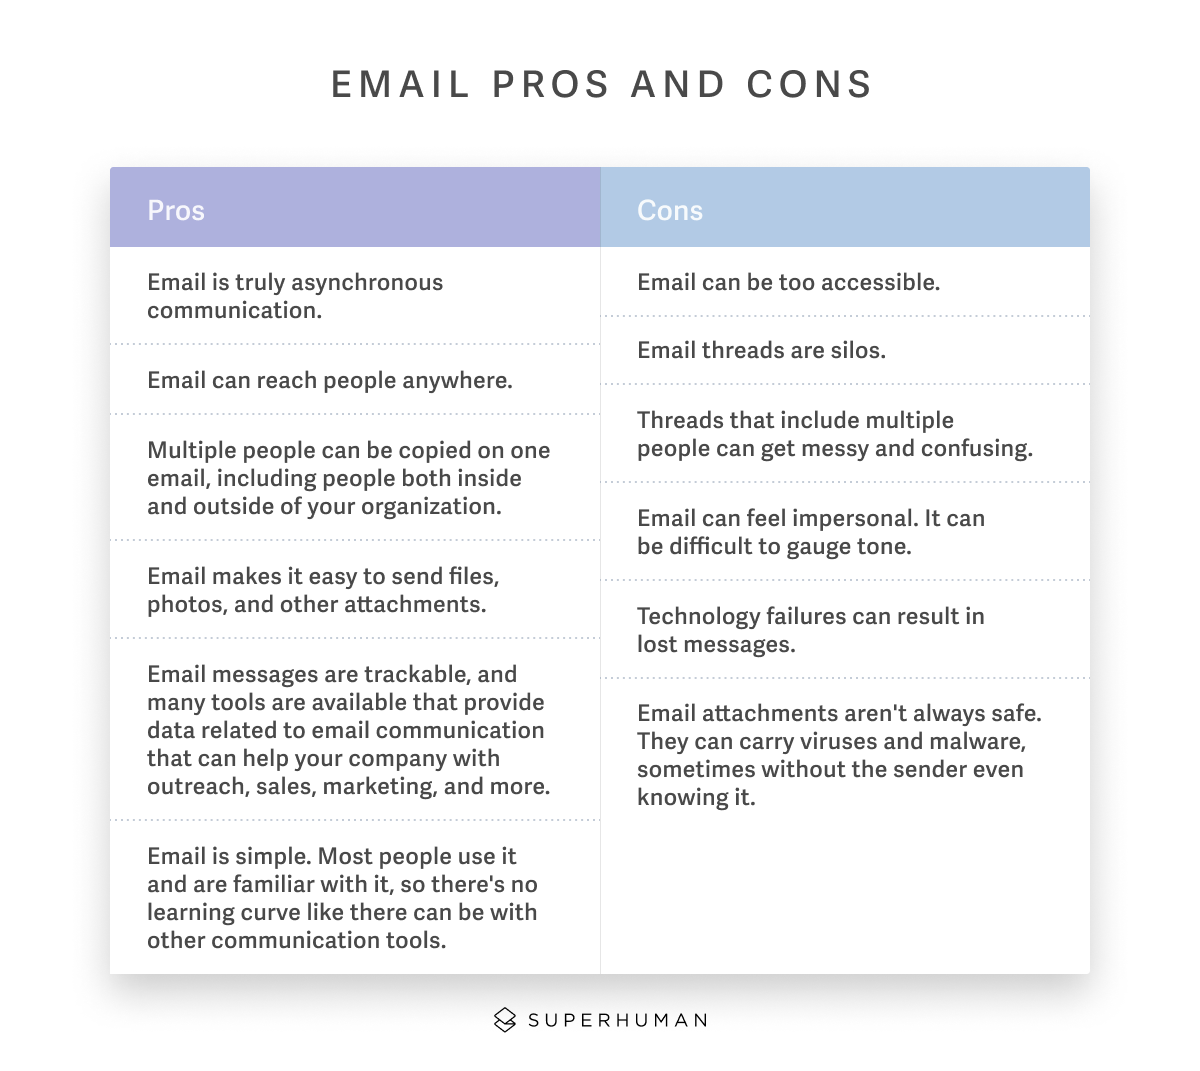 Email pros and cons